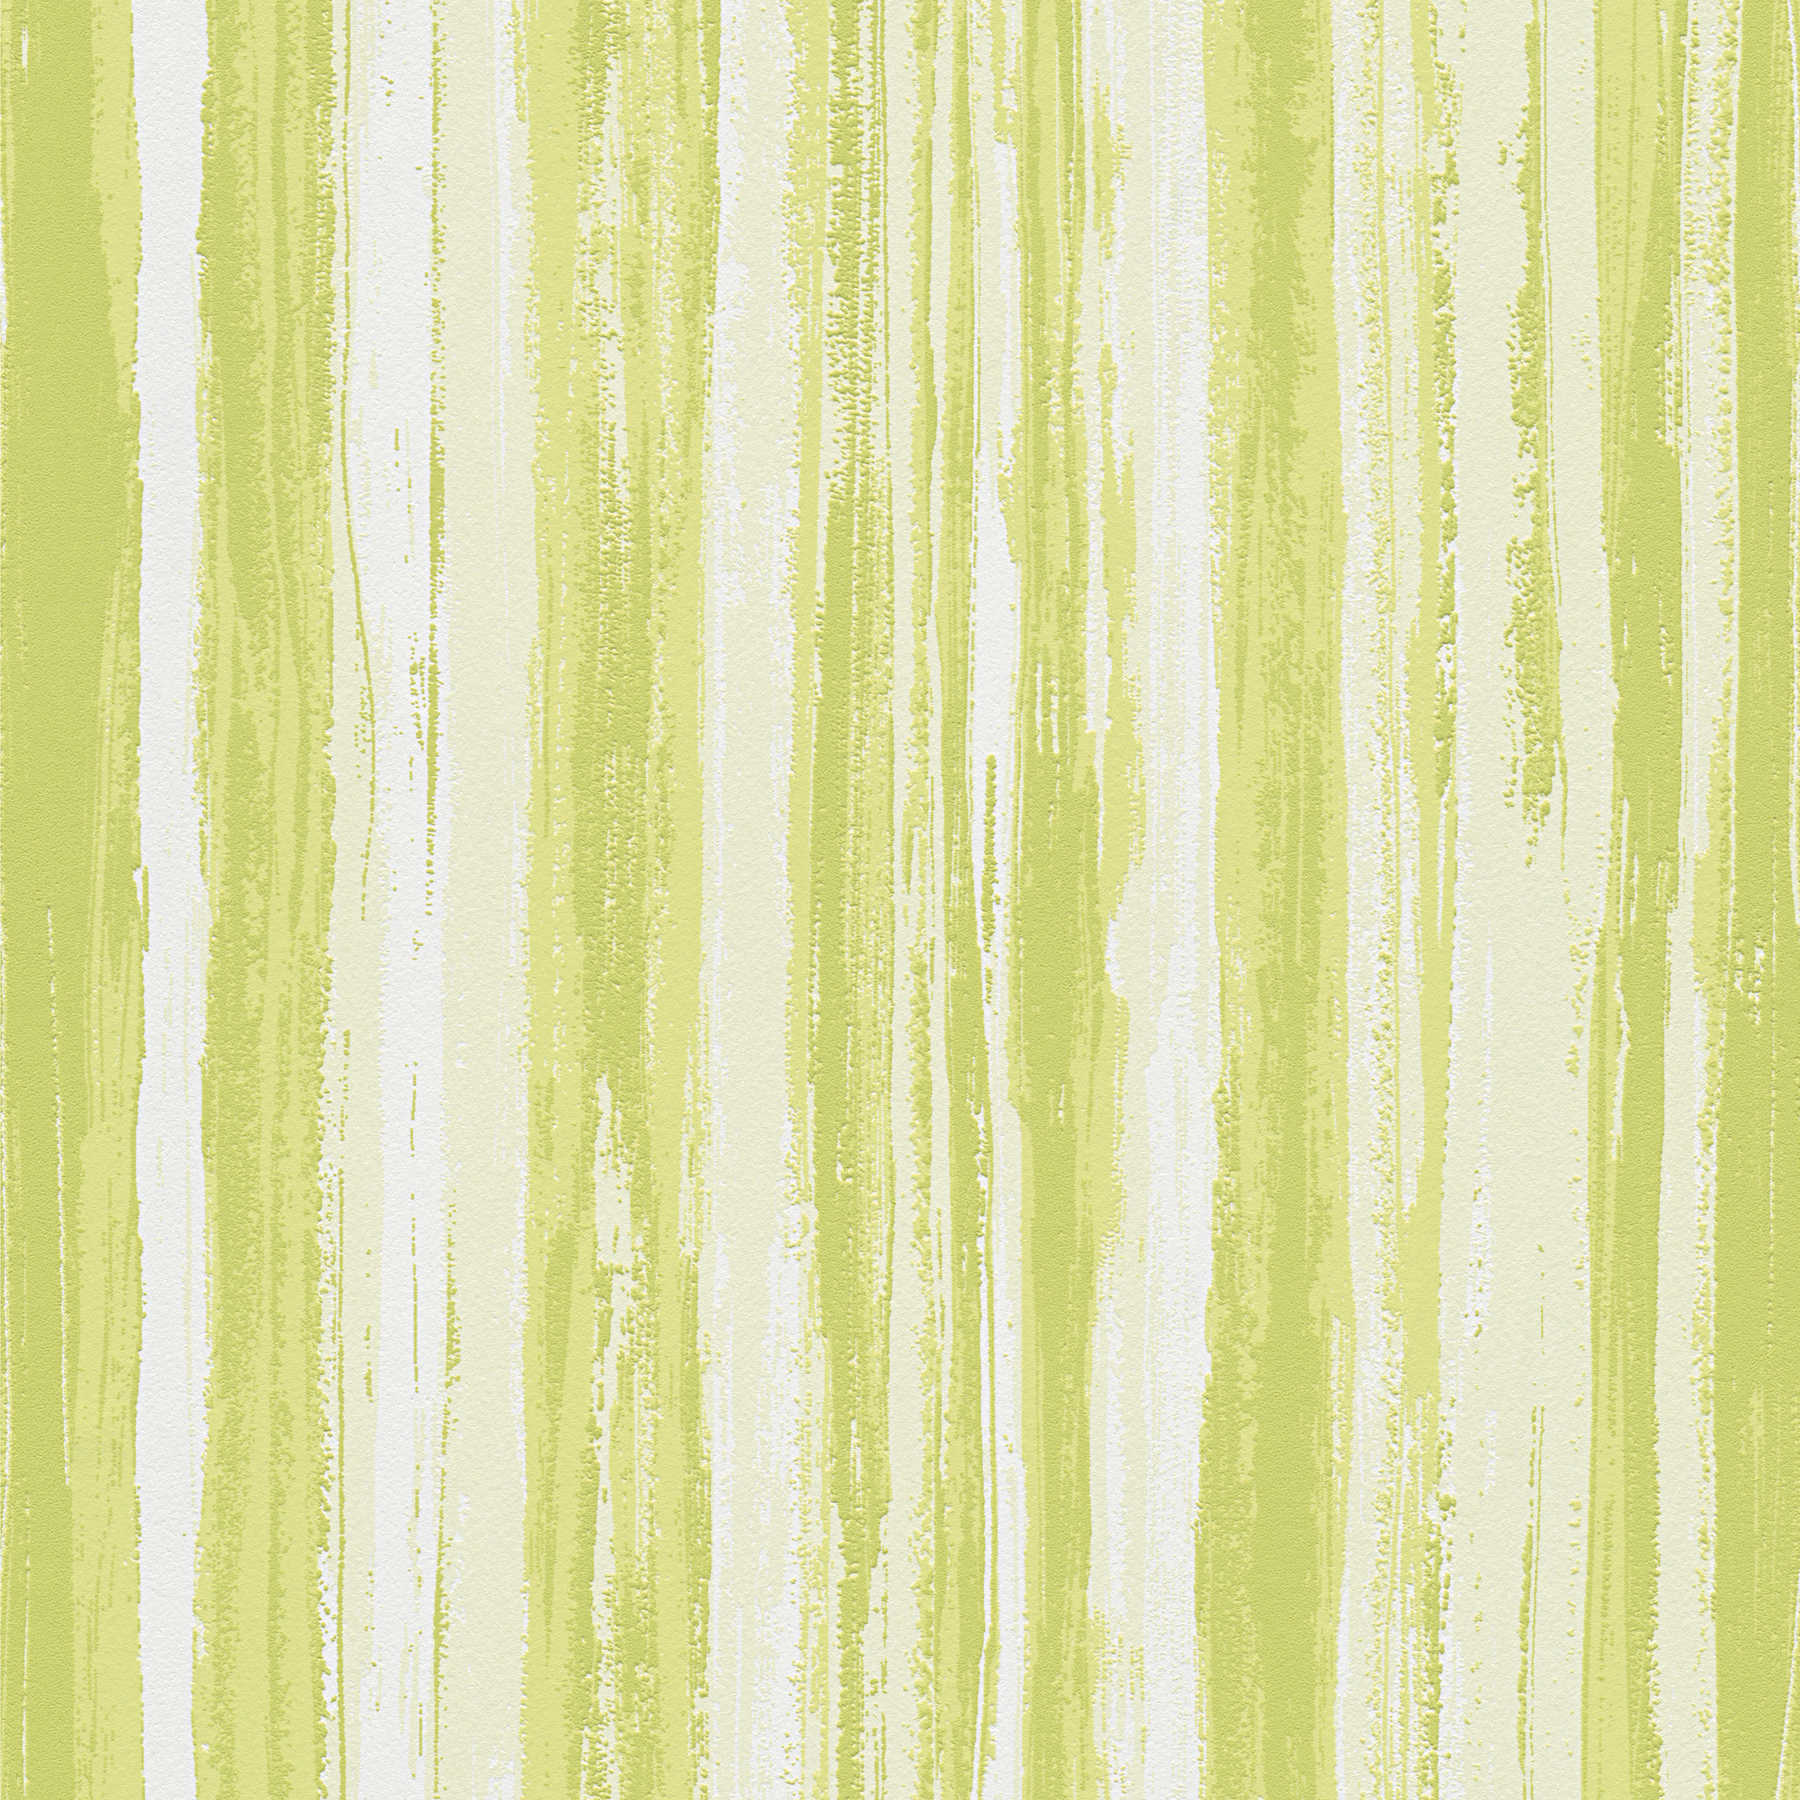 Green wallpaper with natural line pattern - green, white
